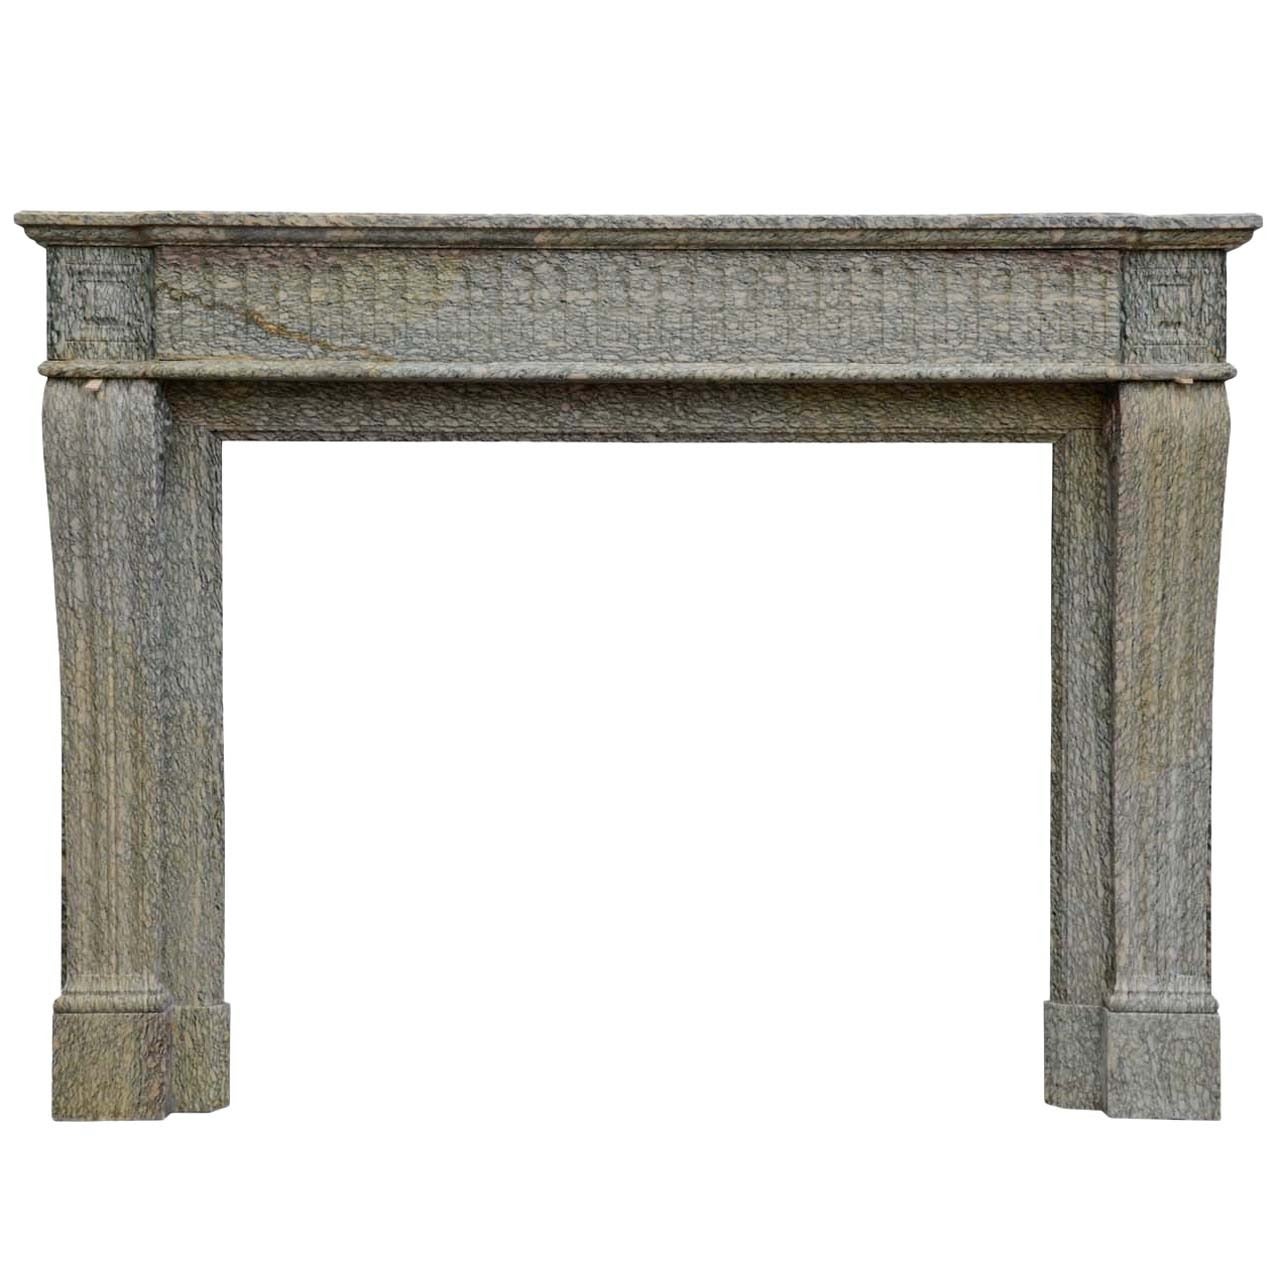 French Louis XVI Style Marble Fireplace, 19th Century For Sale